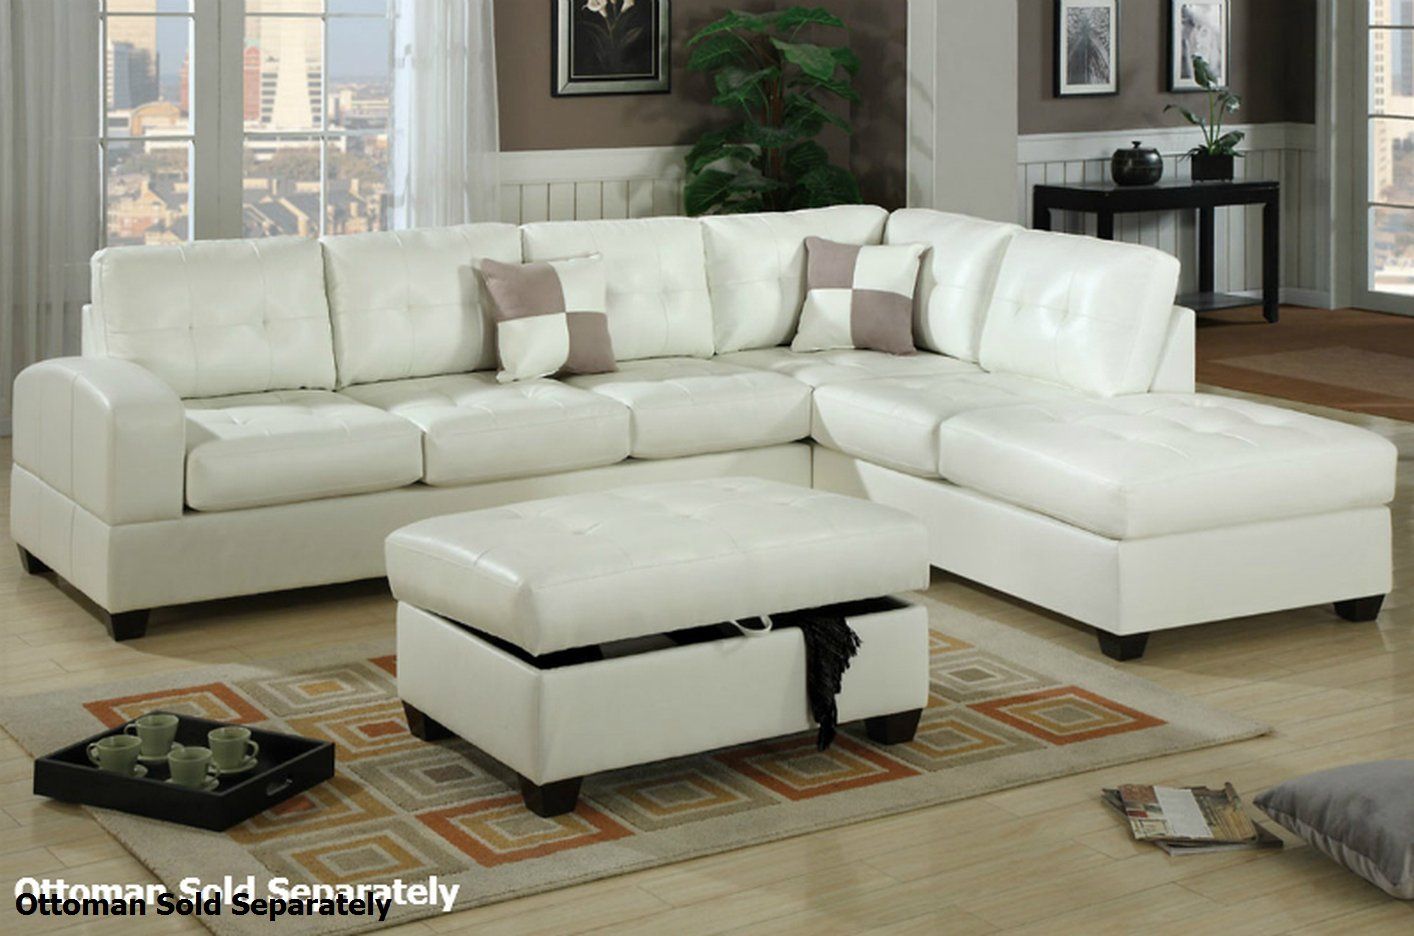 Poundex Reese F7359 White Leather Sectional Sofa – Steal A Pertaining To Sectional Sofas In White (View 3 of 15)